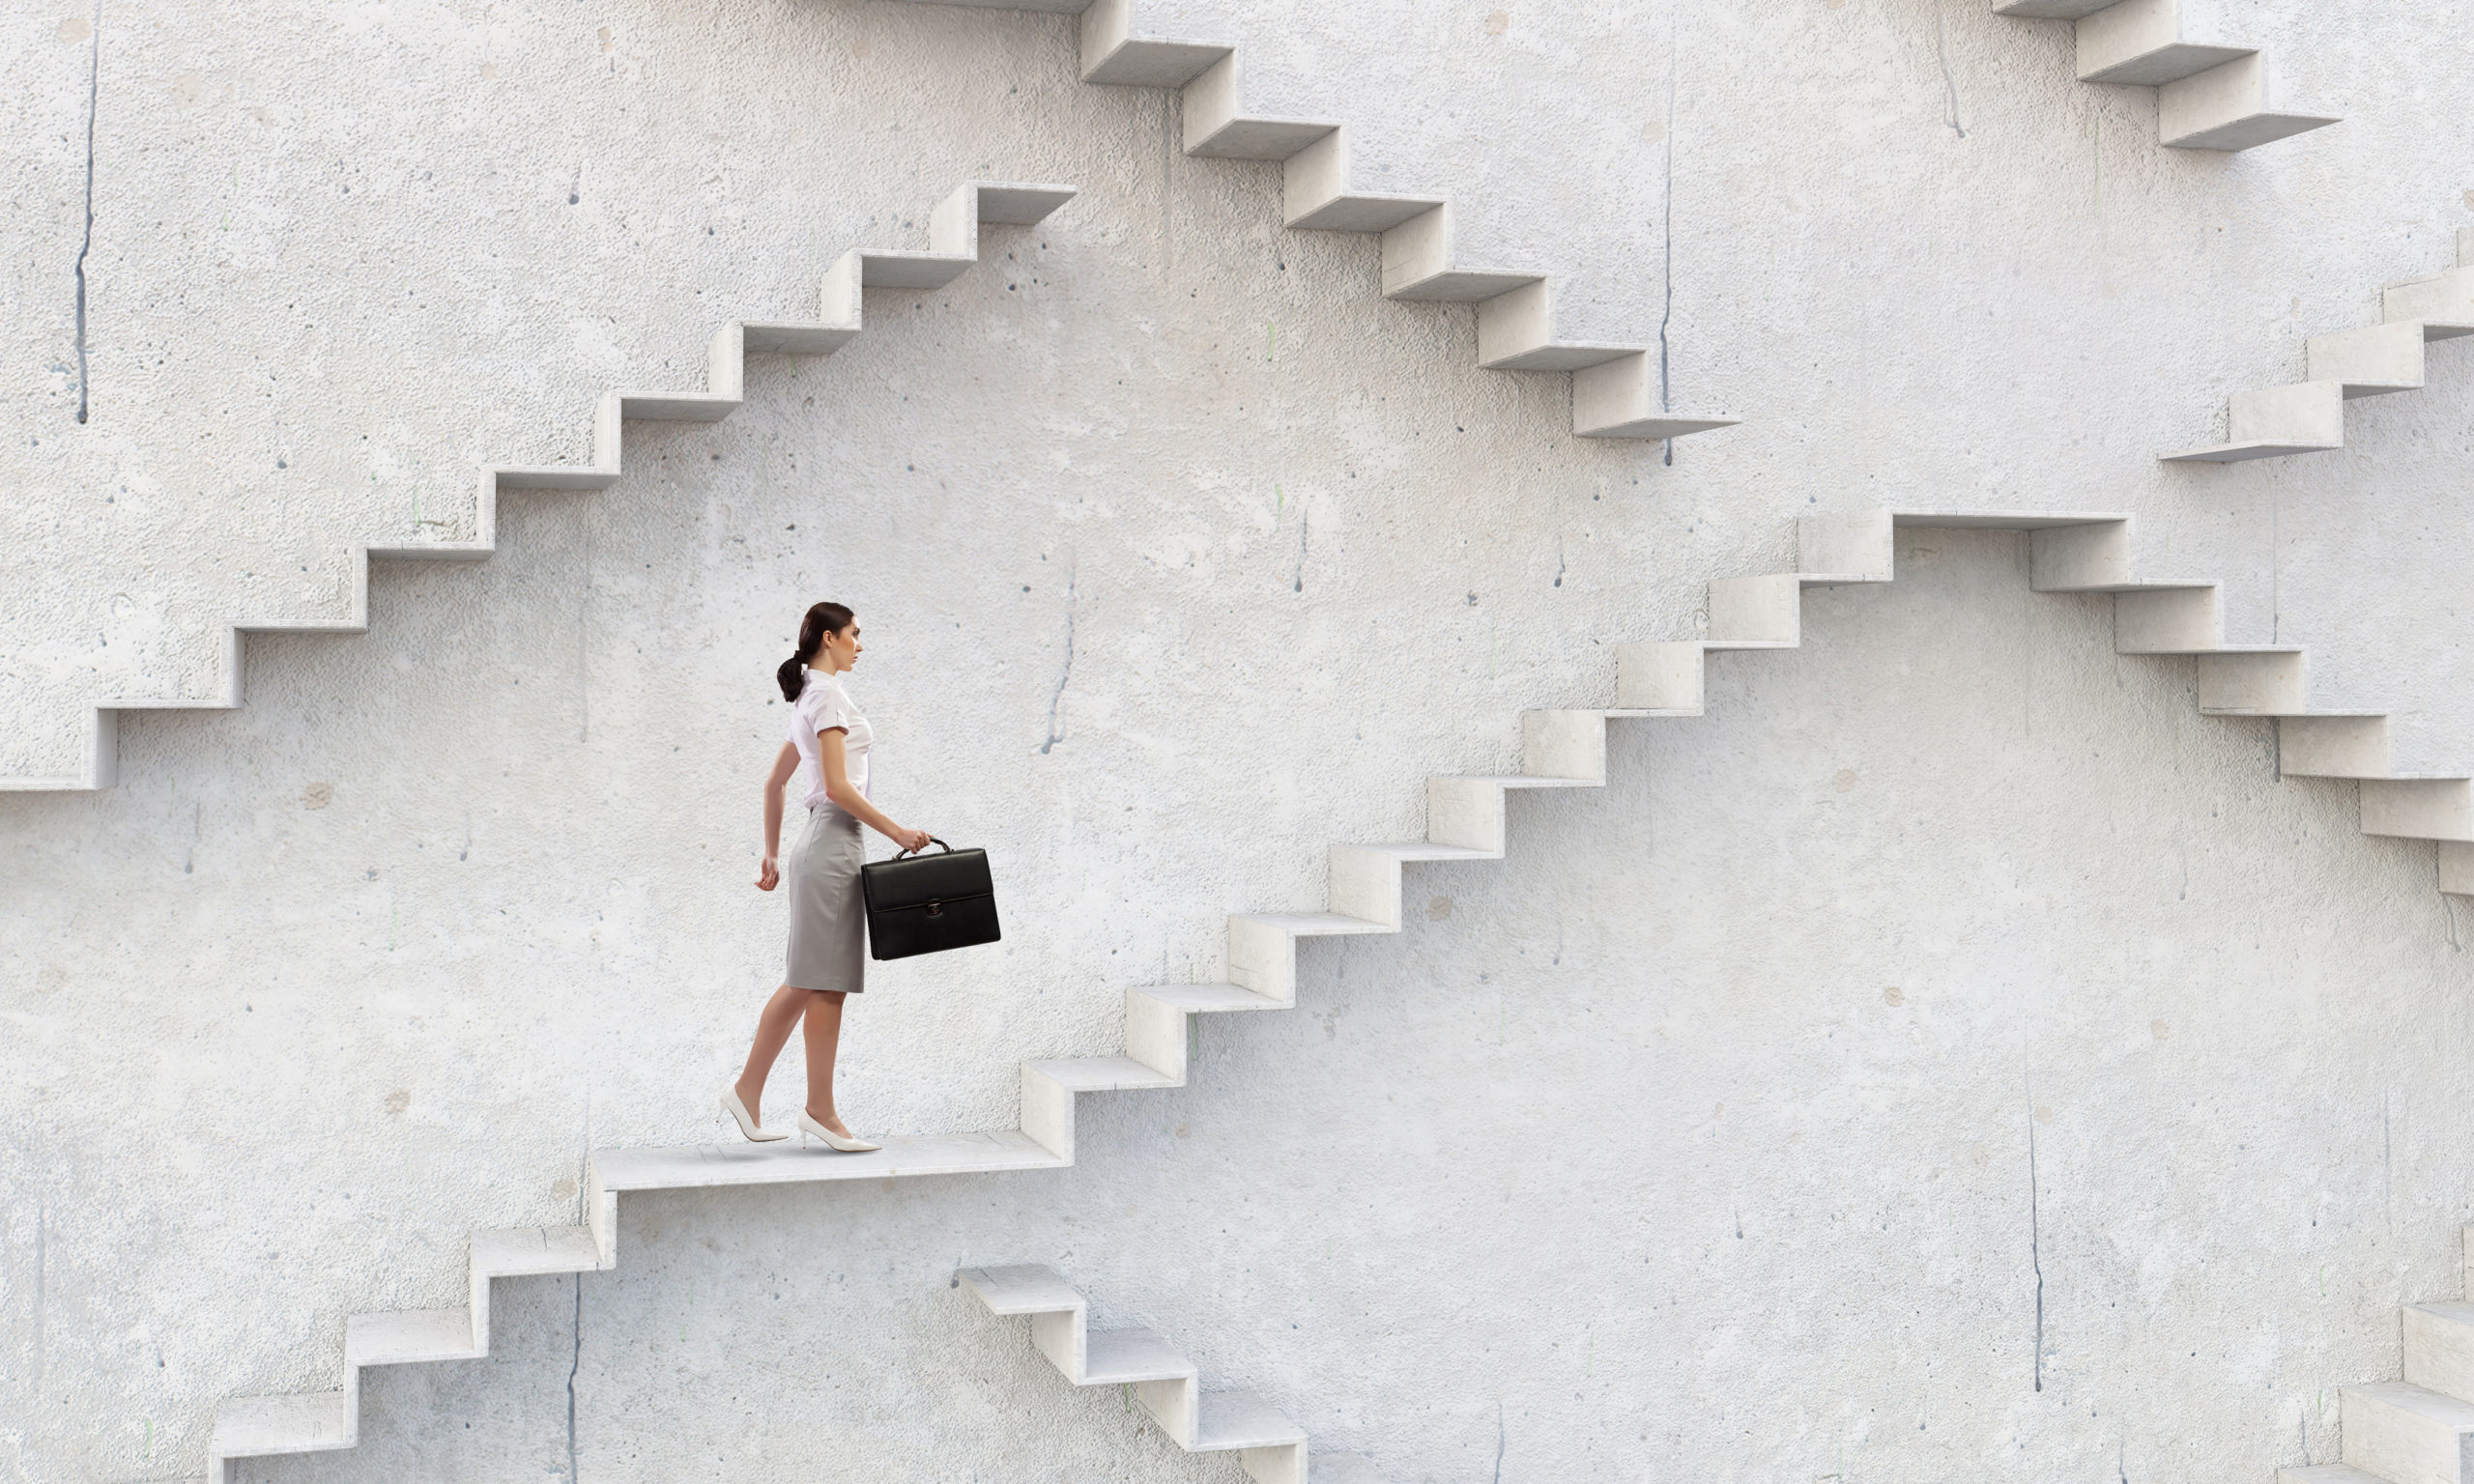 A businesswoman climbs a staircase as symbol of self-development and career growth.